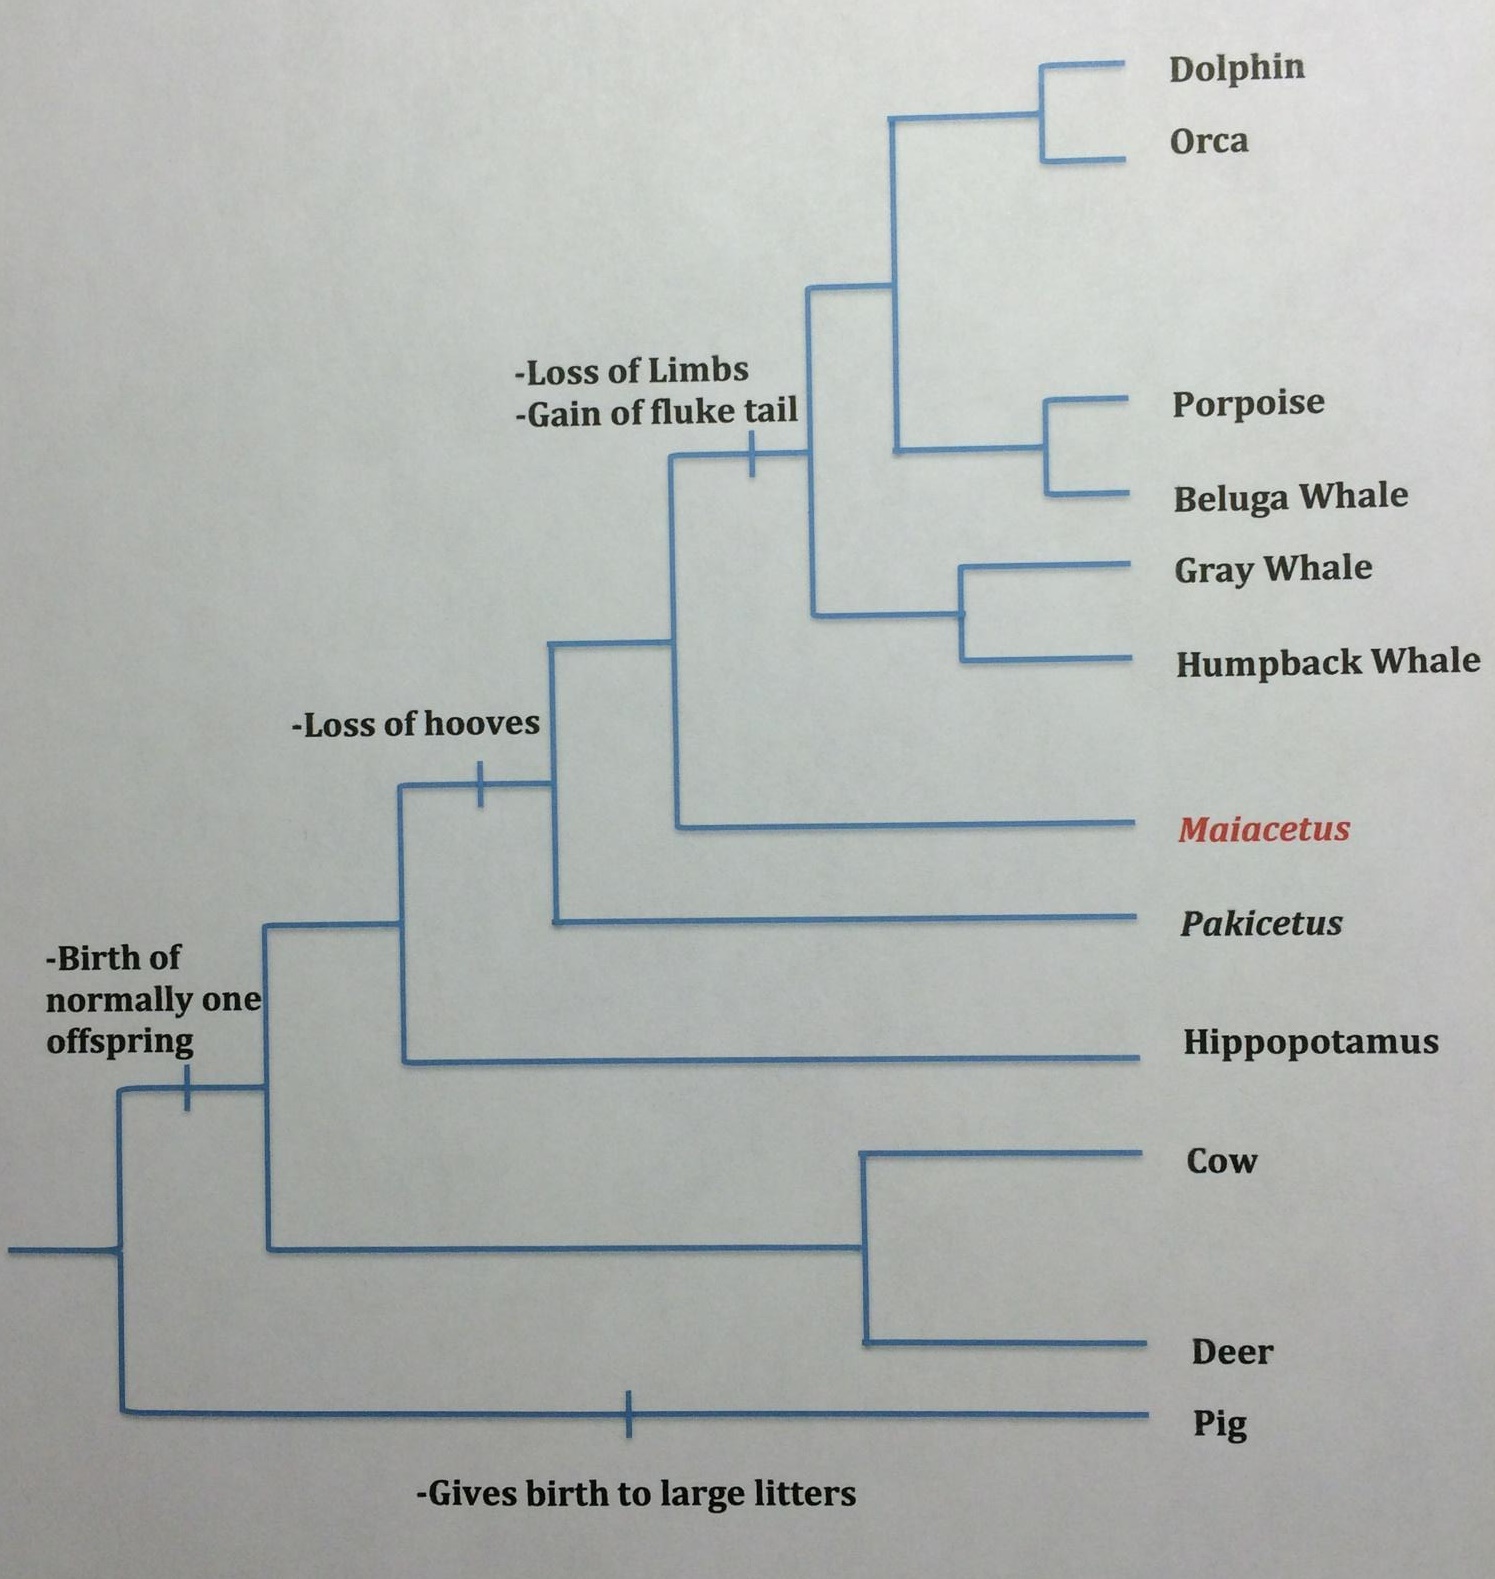 Phylogenetic tree of Good Mother Whale with closest relatives. Used with permission from Bamfield Marine Sciences Centre.